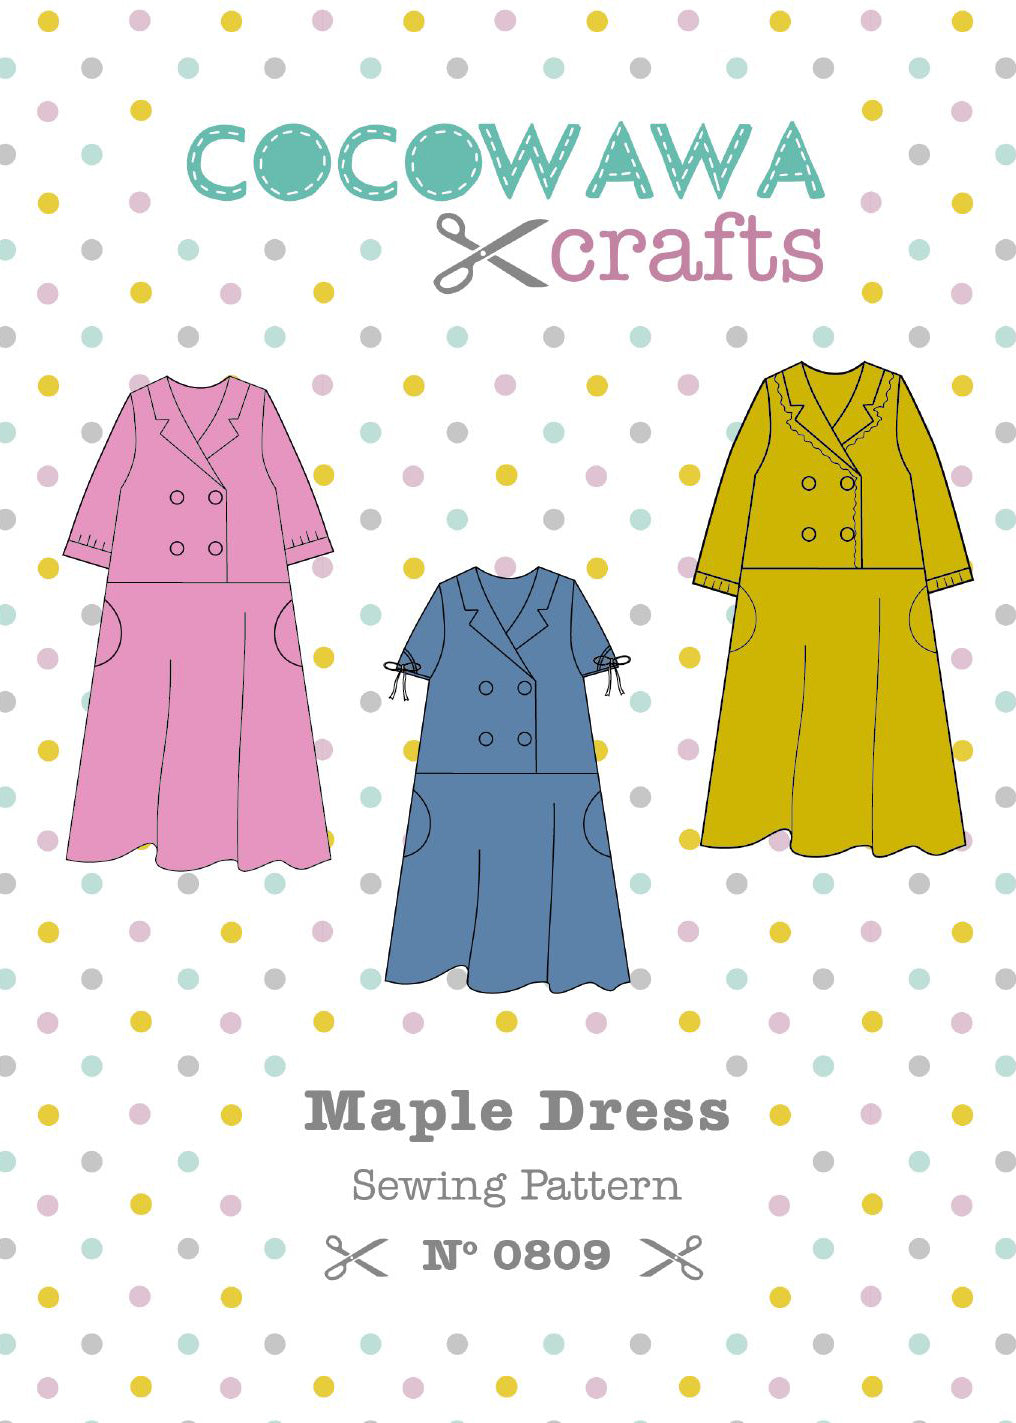 Maple dress sewing pattern instructions cover English CocoWawa Crafts